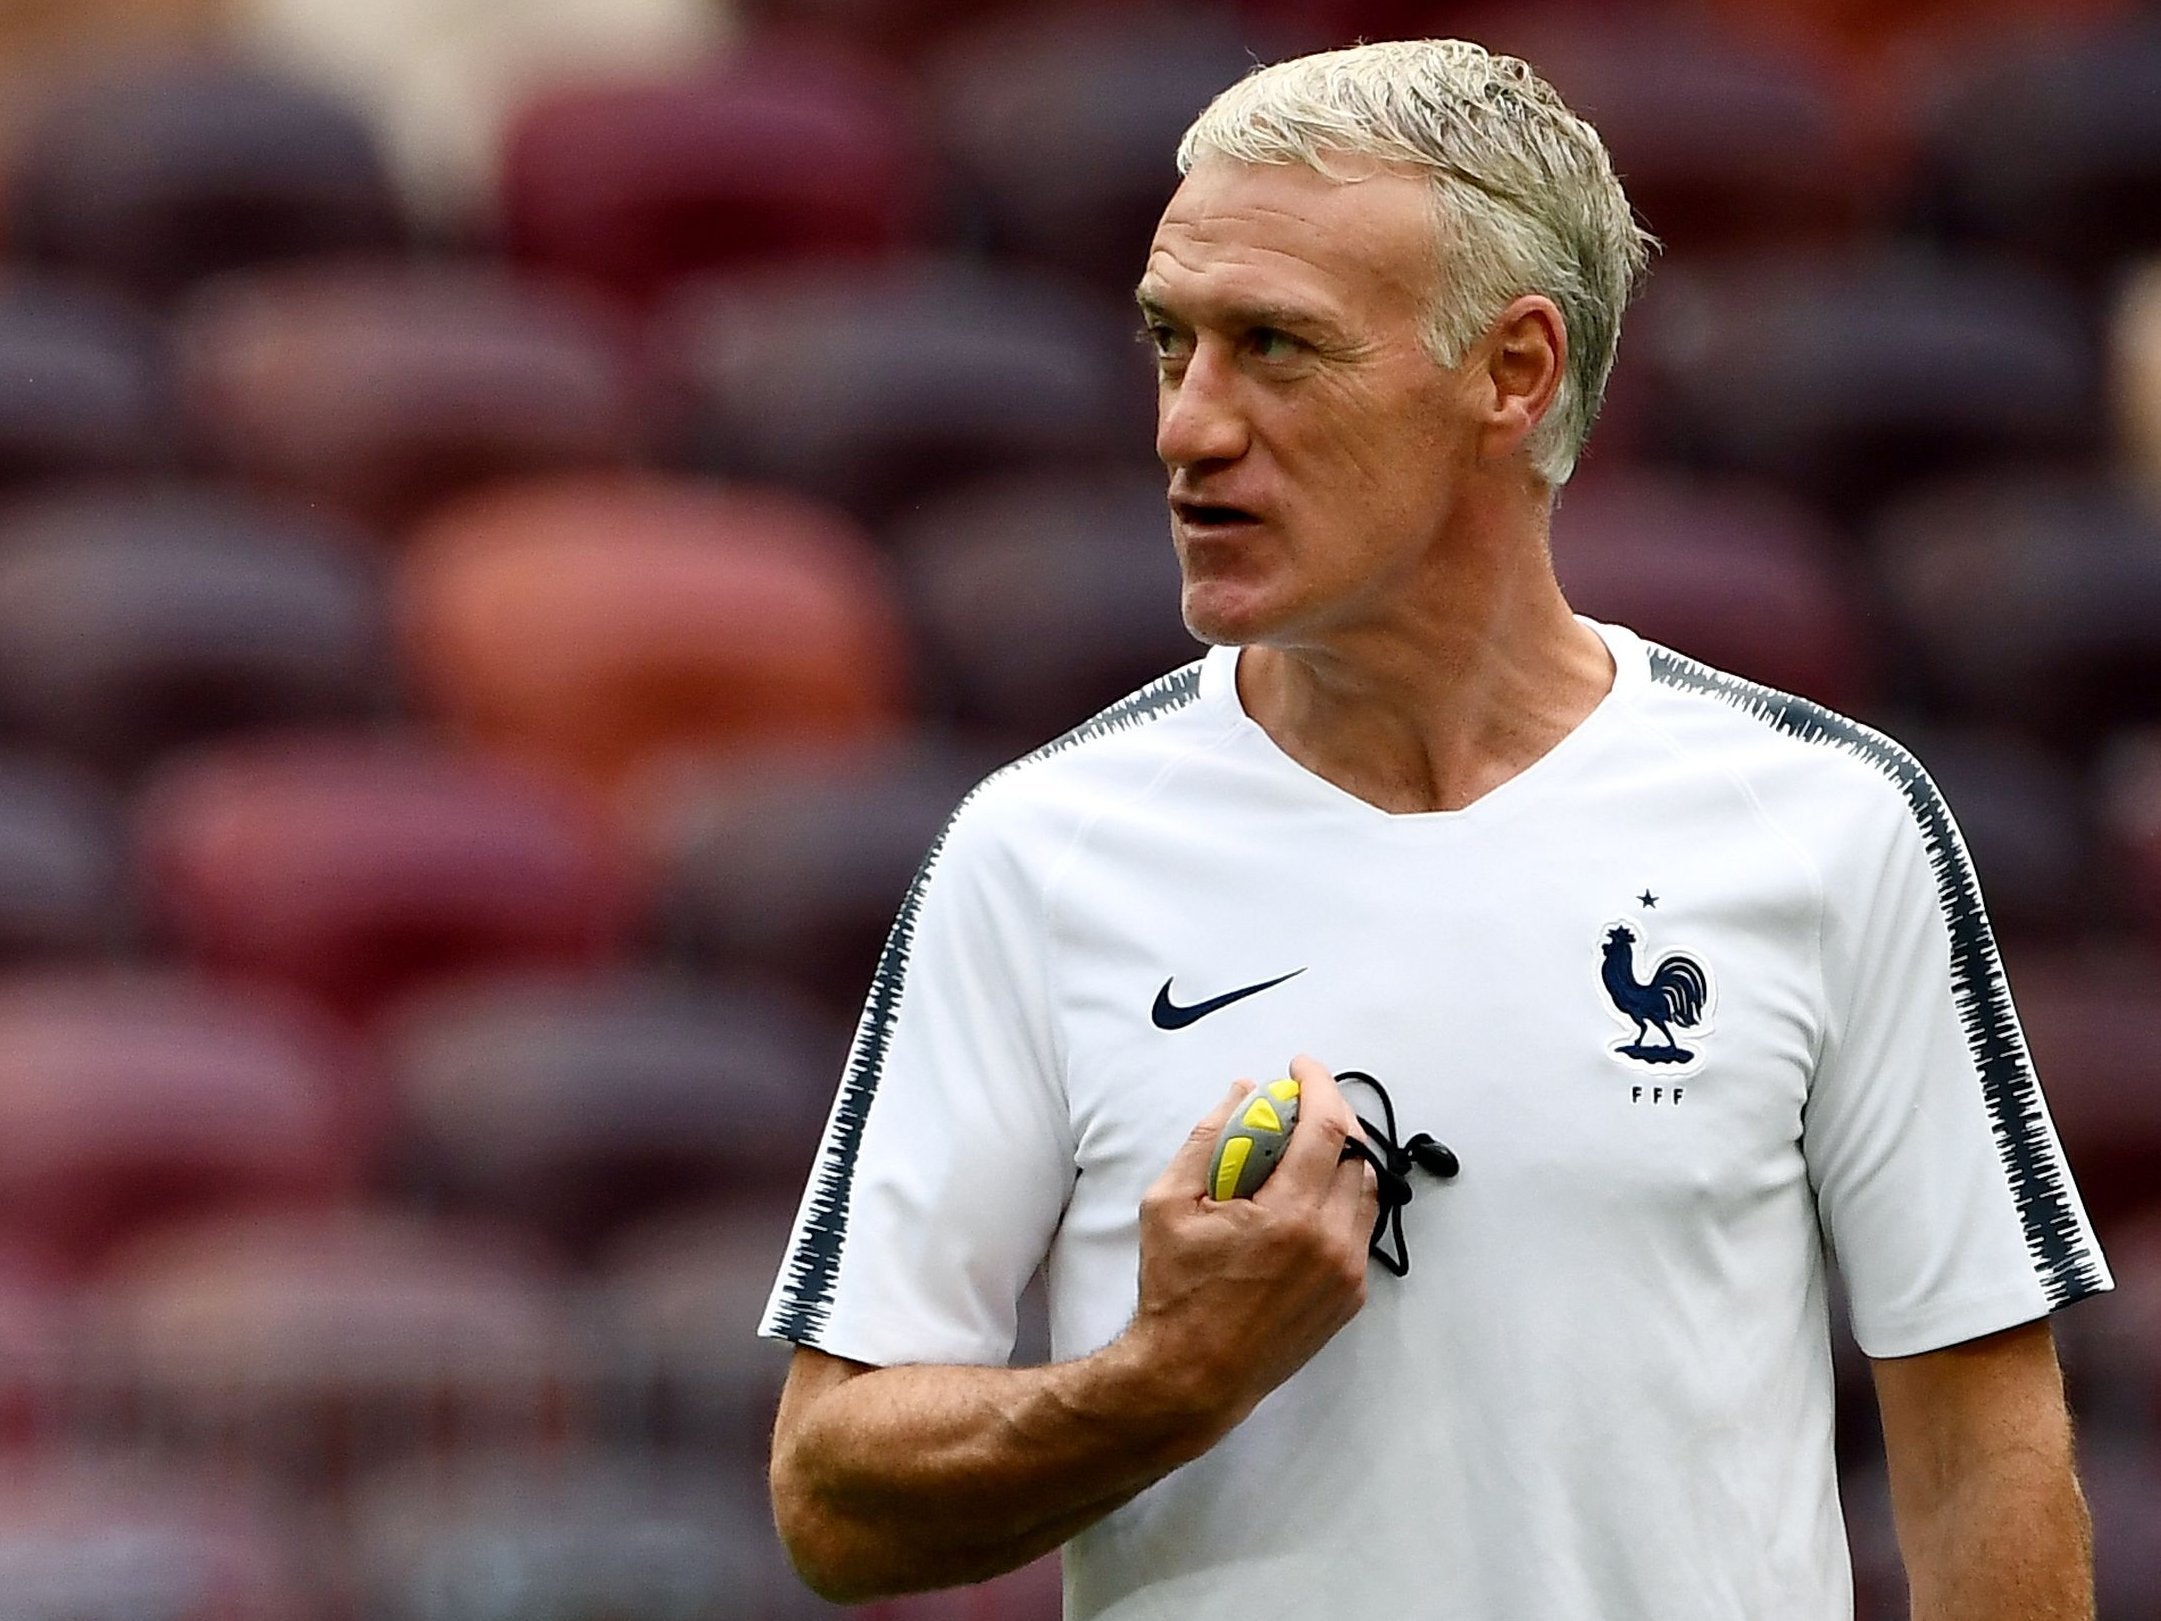 Didier Deschamps was reminded of what Danish counterpart Age Hareide had said about France